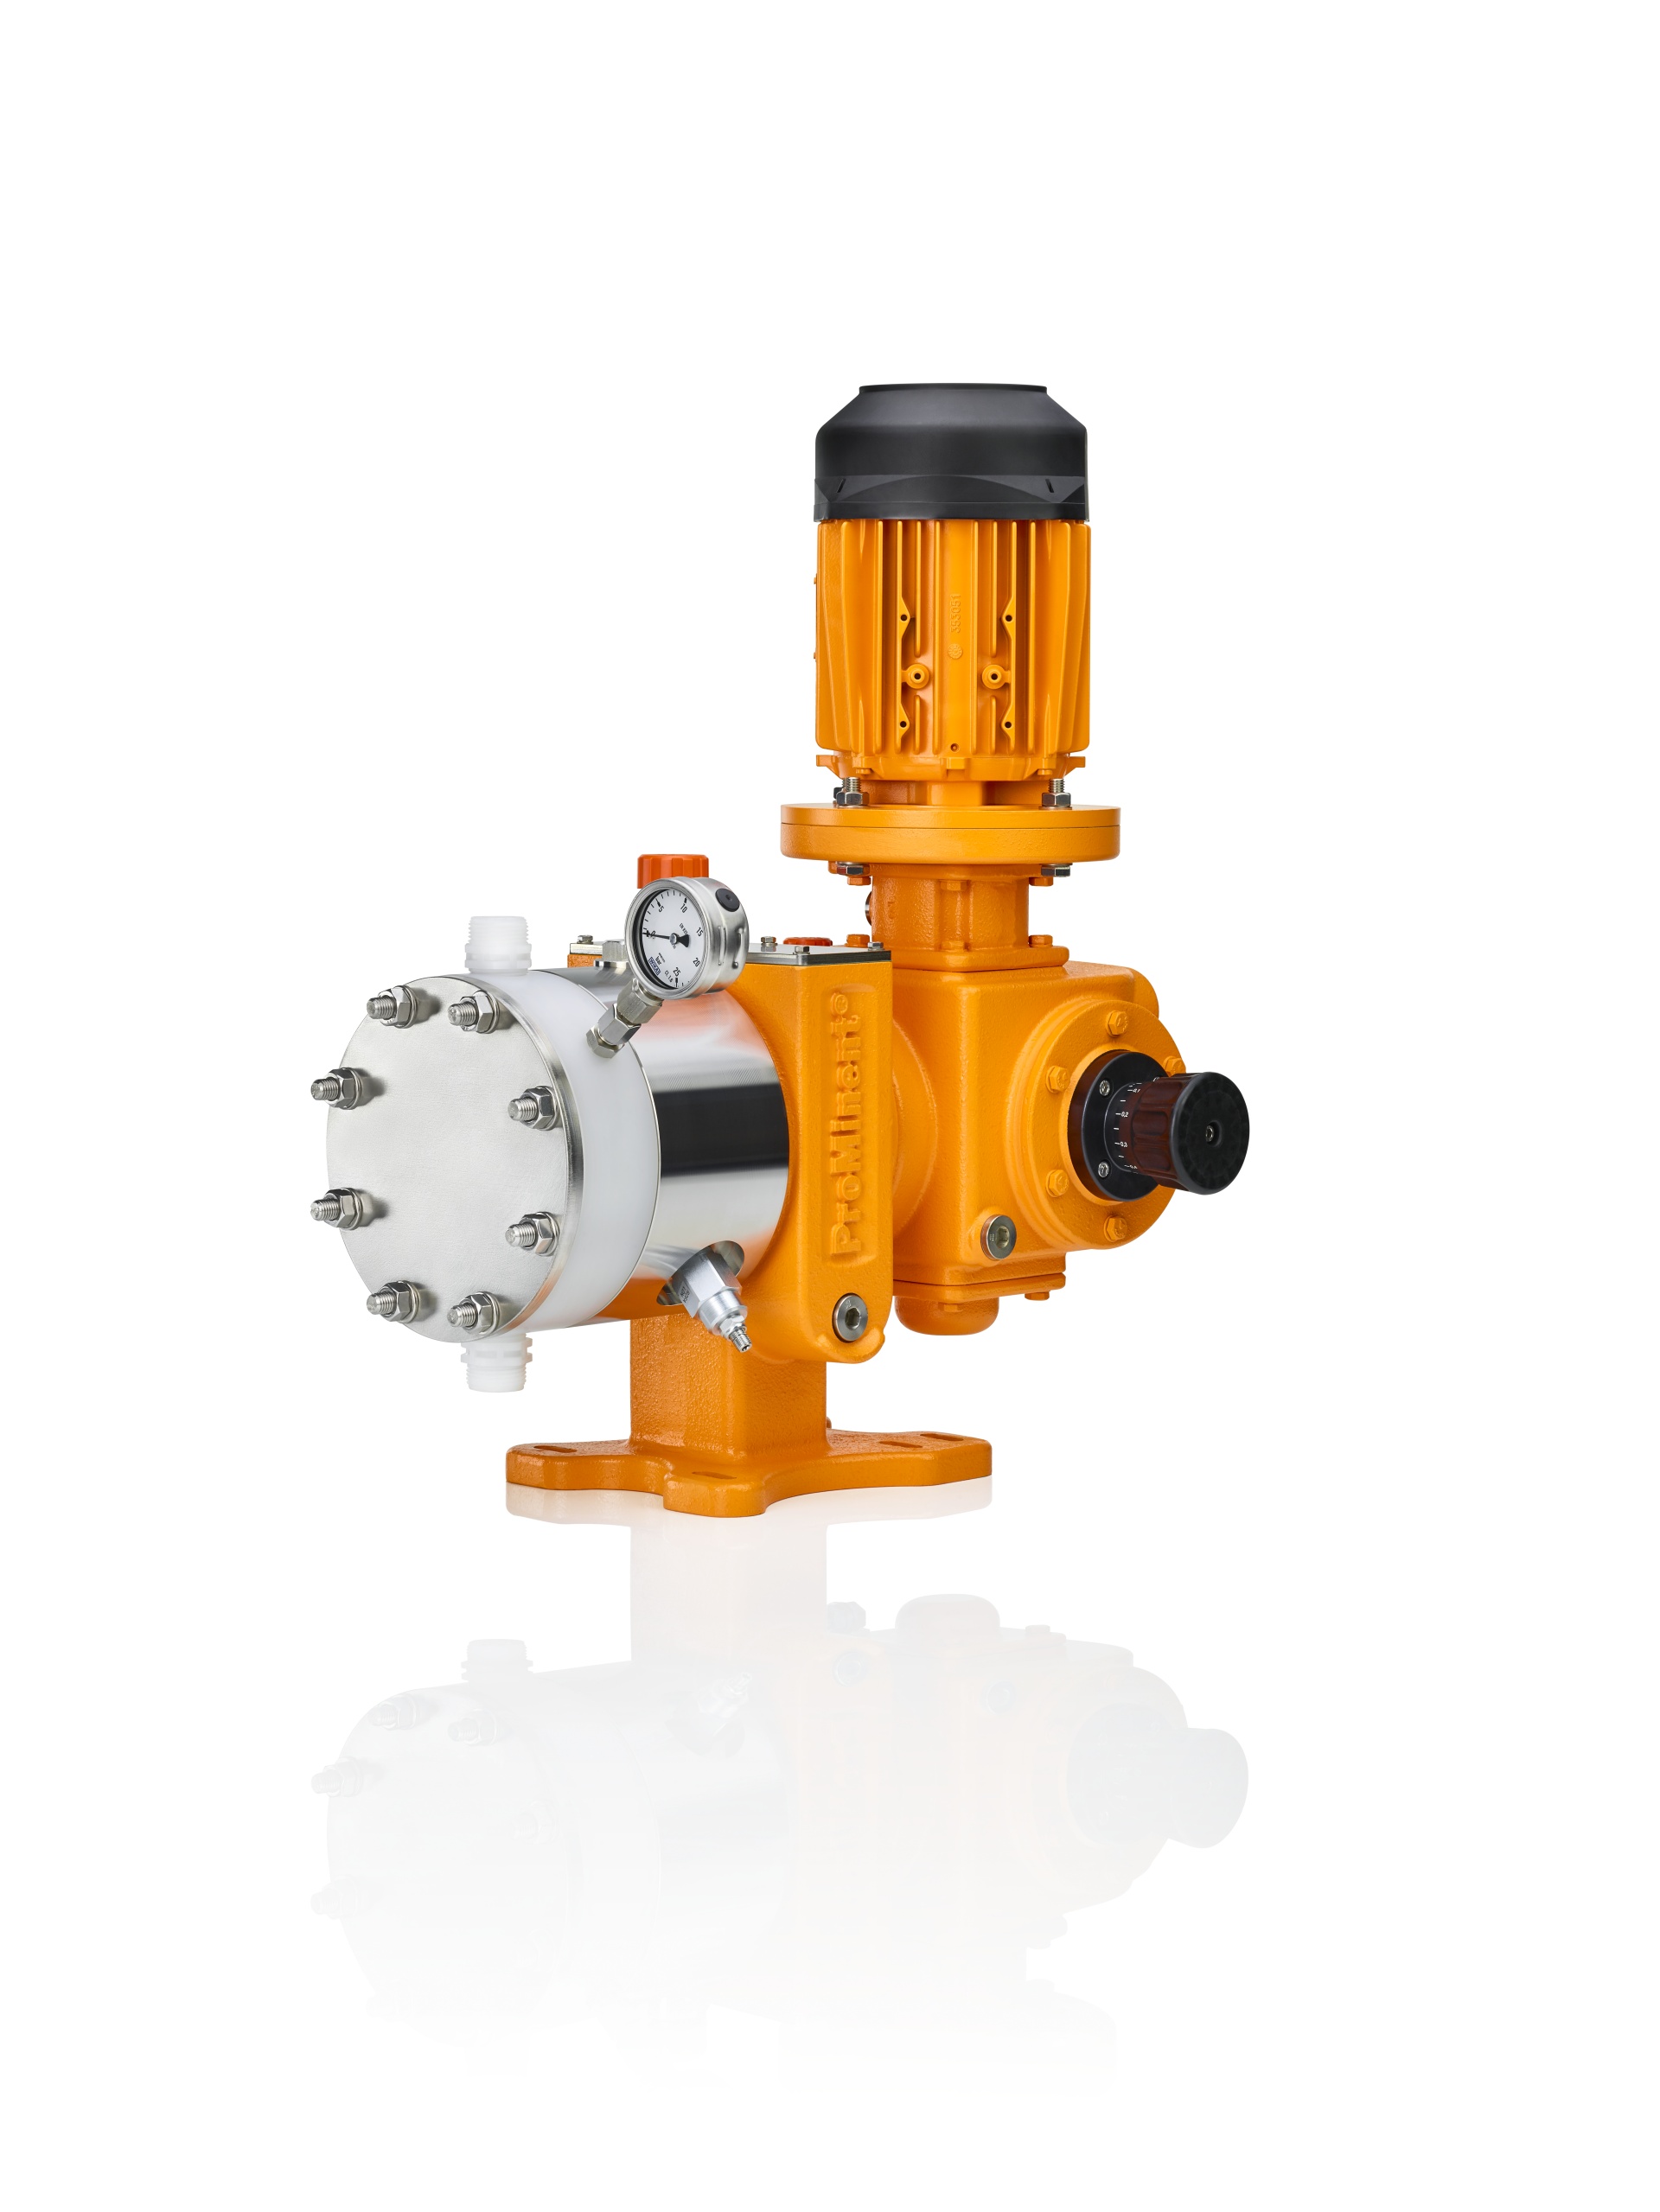 The Orlita Evolution range with PVDF and PVC dosing heads meets the most stringent safety requirements for the capacity range 3 – 7,352 l/h at pressures up to 21 bar.